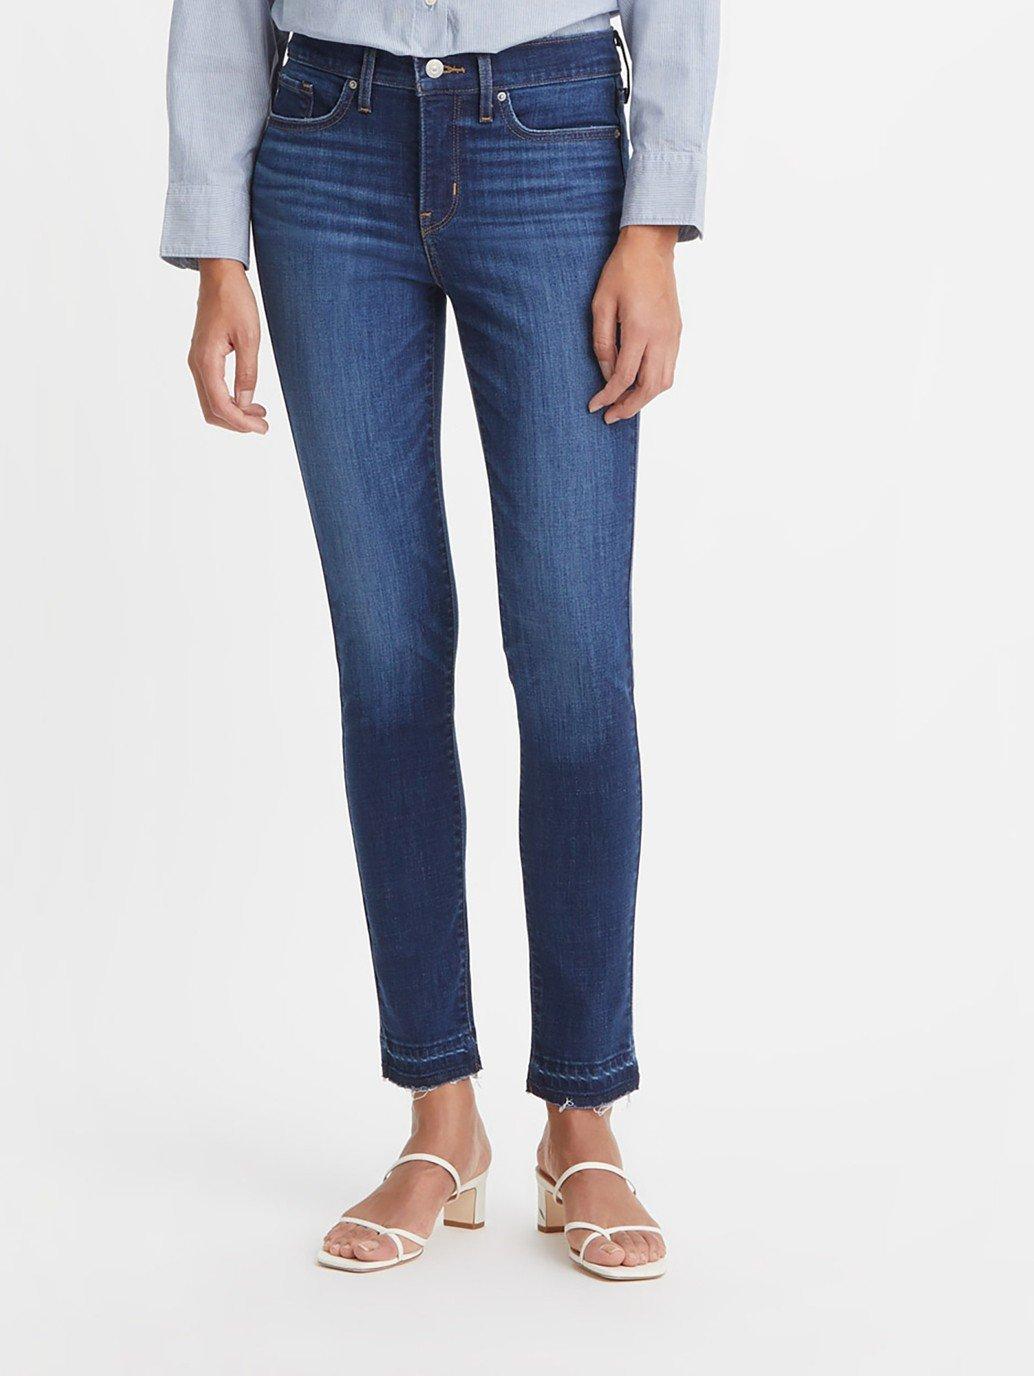 Levi's® Women's 311 Shaping Skinny Jeans | Levi's® Official Online Store SG